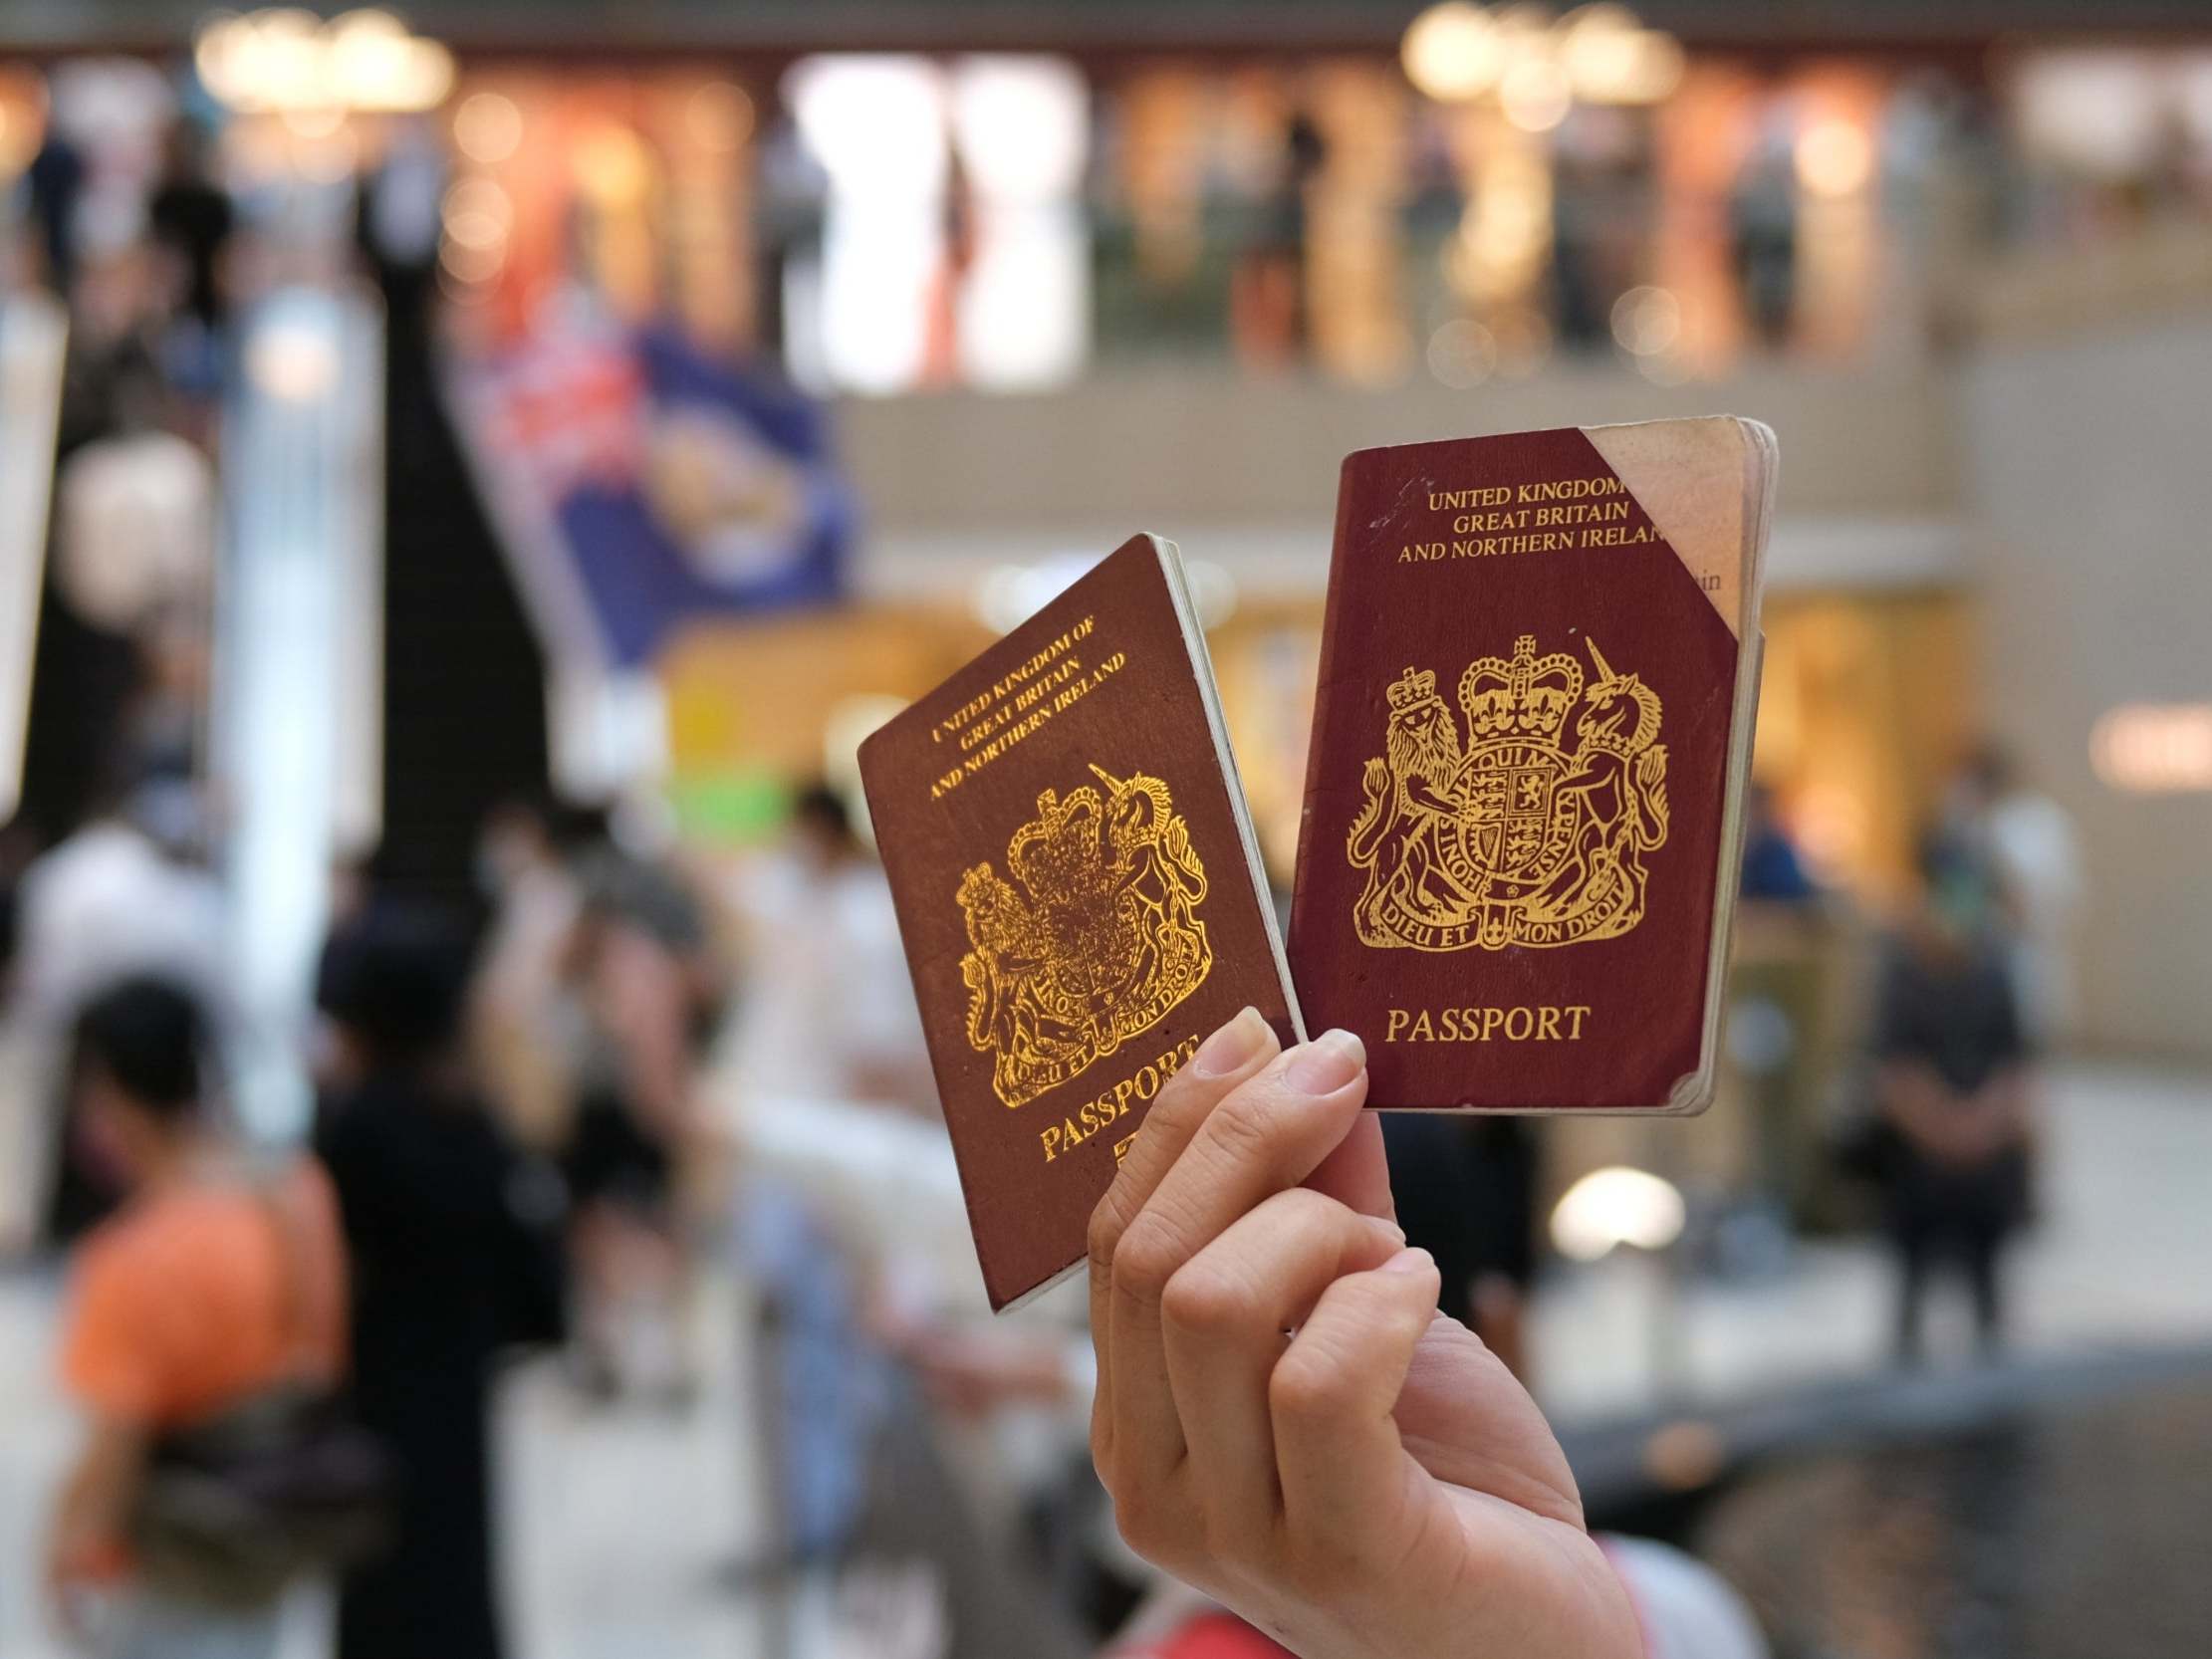 Renewing a passport is taking at least double the usual amount of time